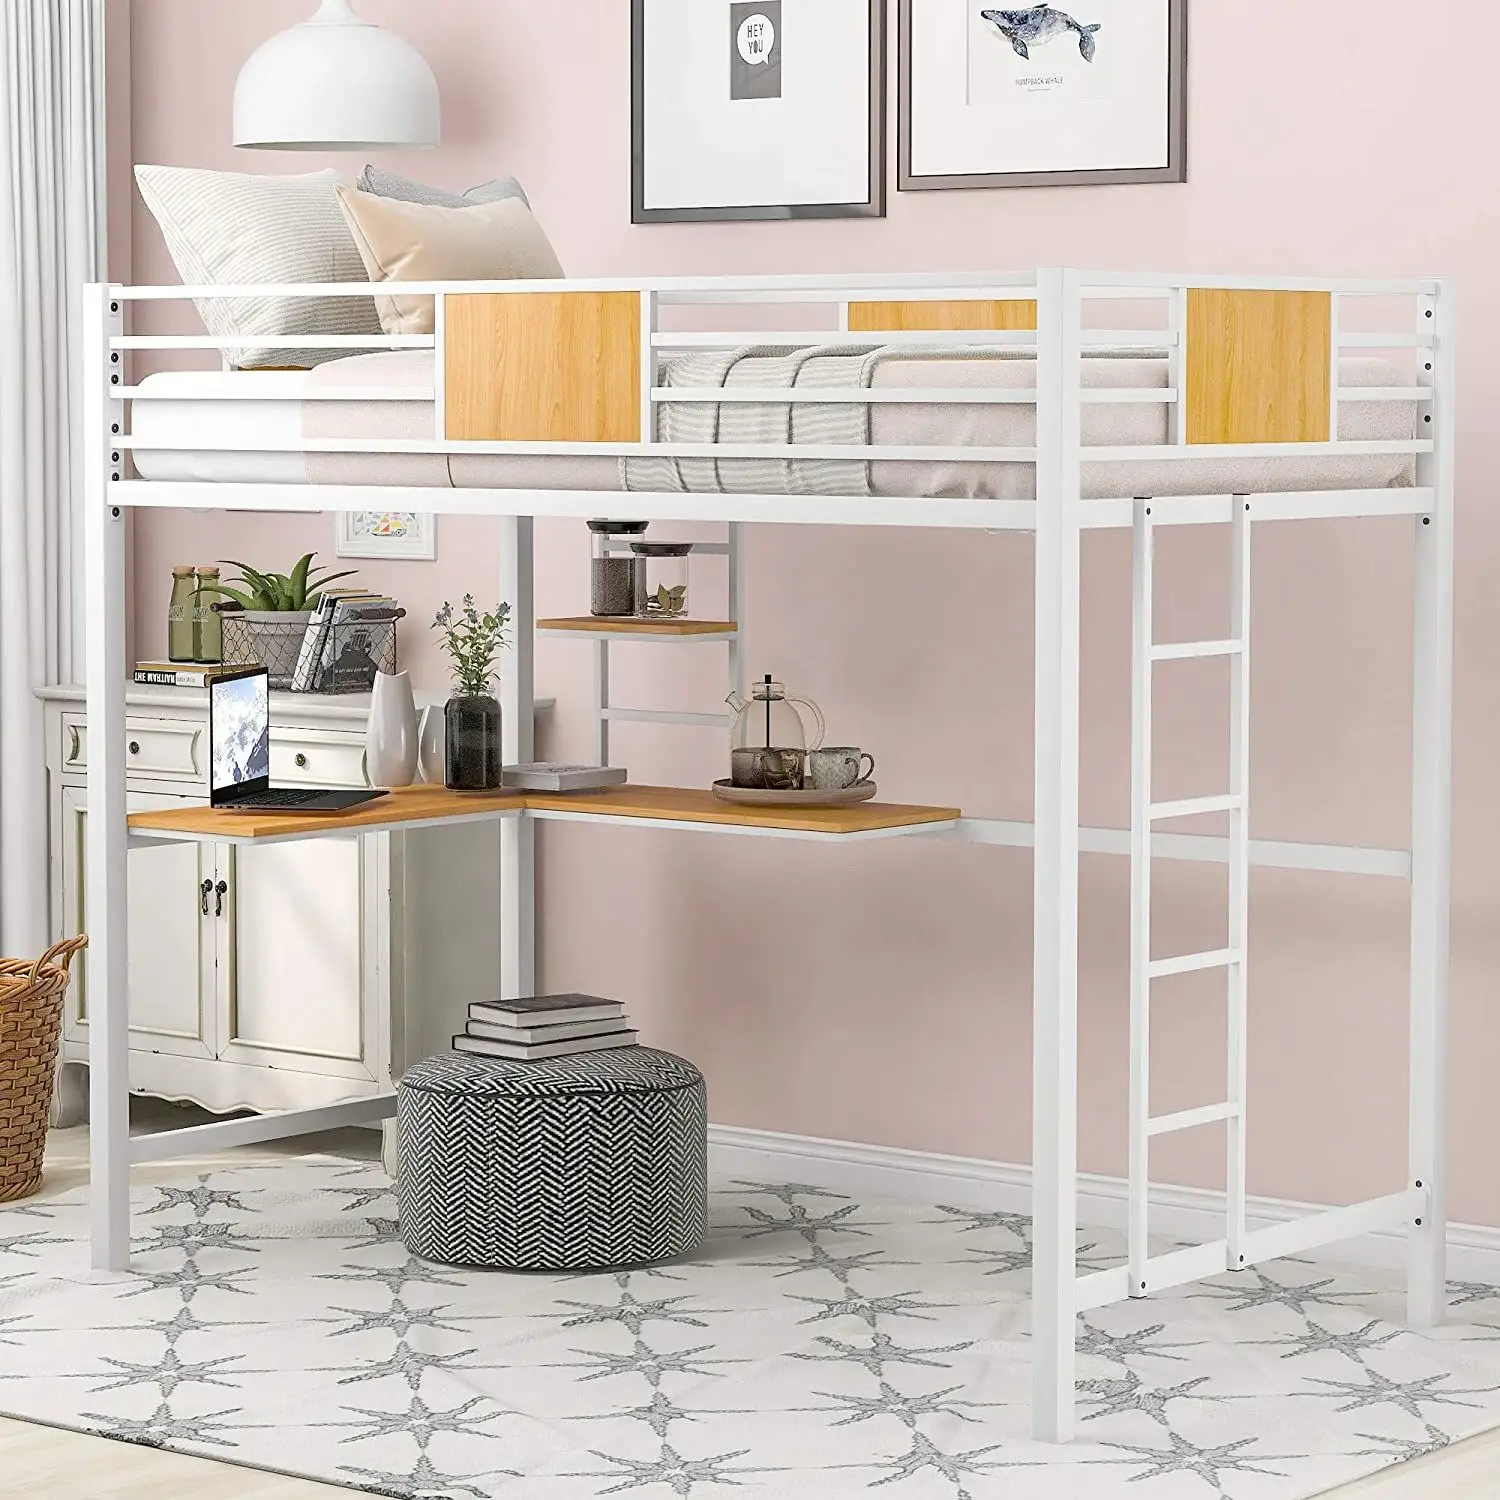 Frame School Apartment Furniture College Dorm Modern Adult Queen Size Loft Bunk Metal Bed With Desk And Shelf